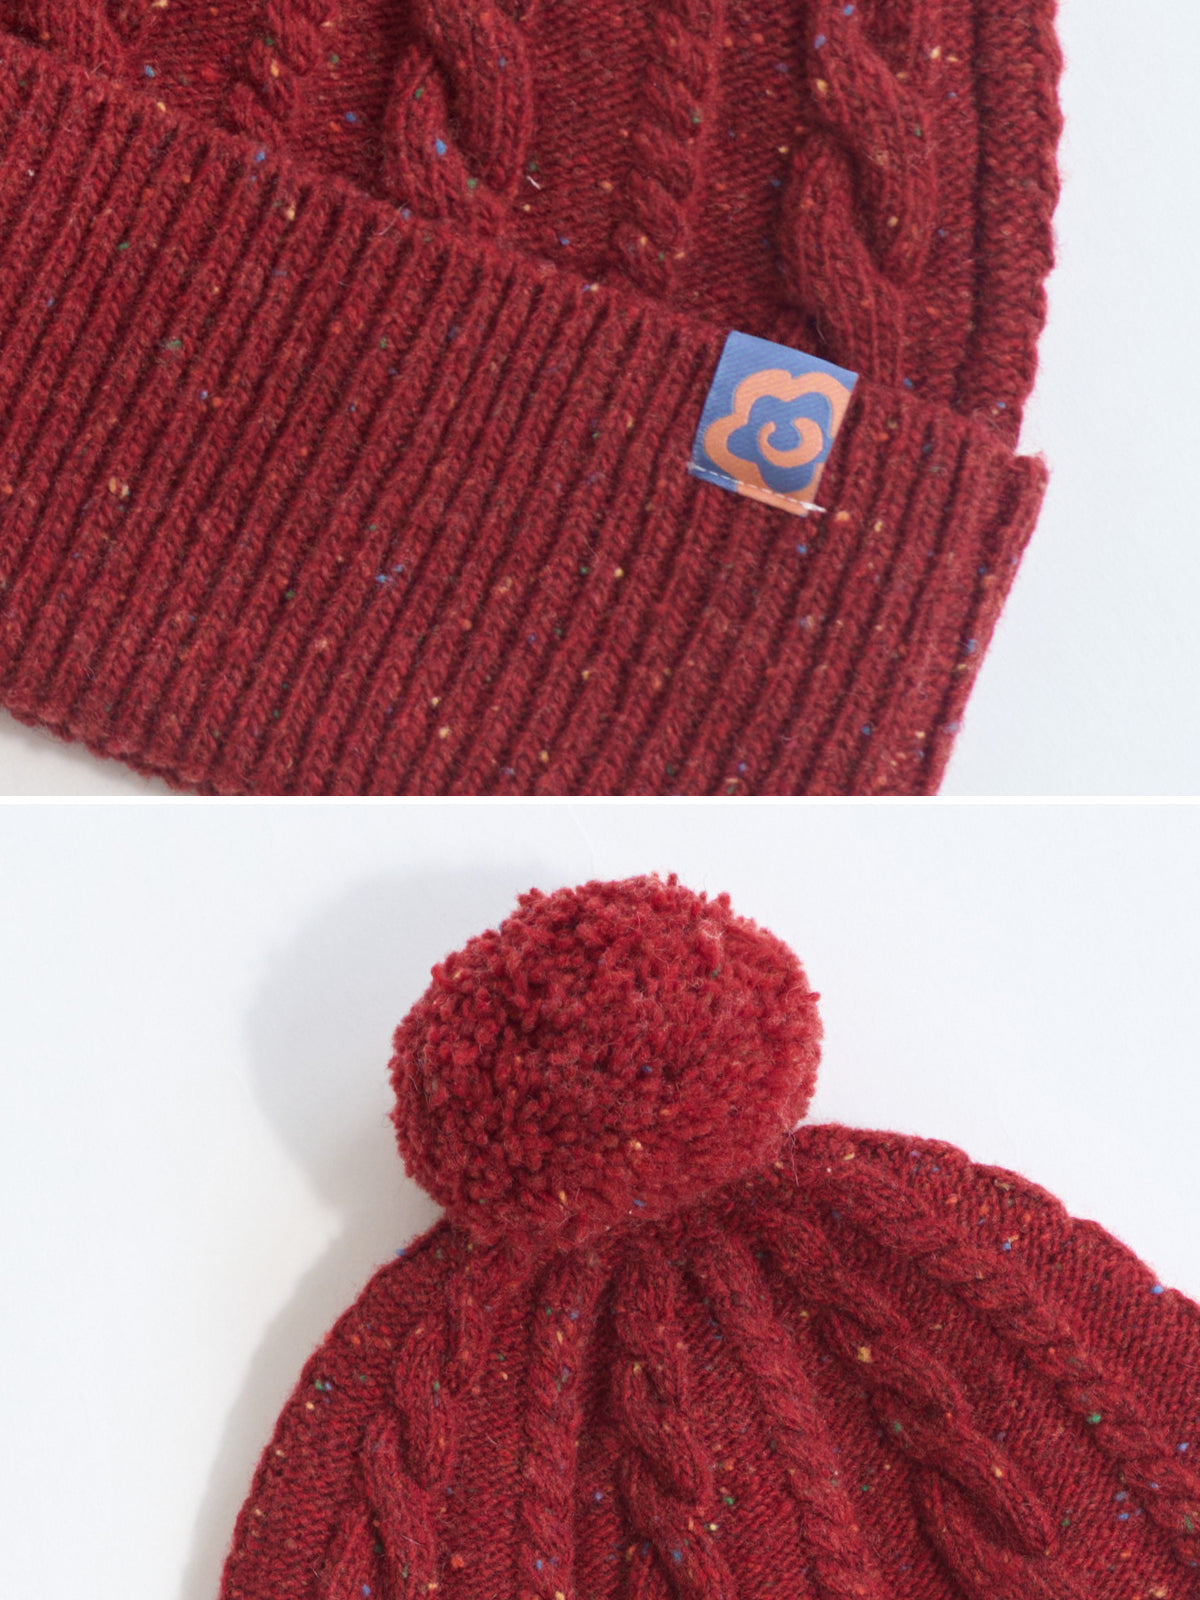 "Pom Pom" Cable Knit Wool Beanie Hat - Wine Red